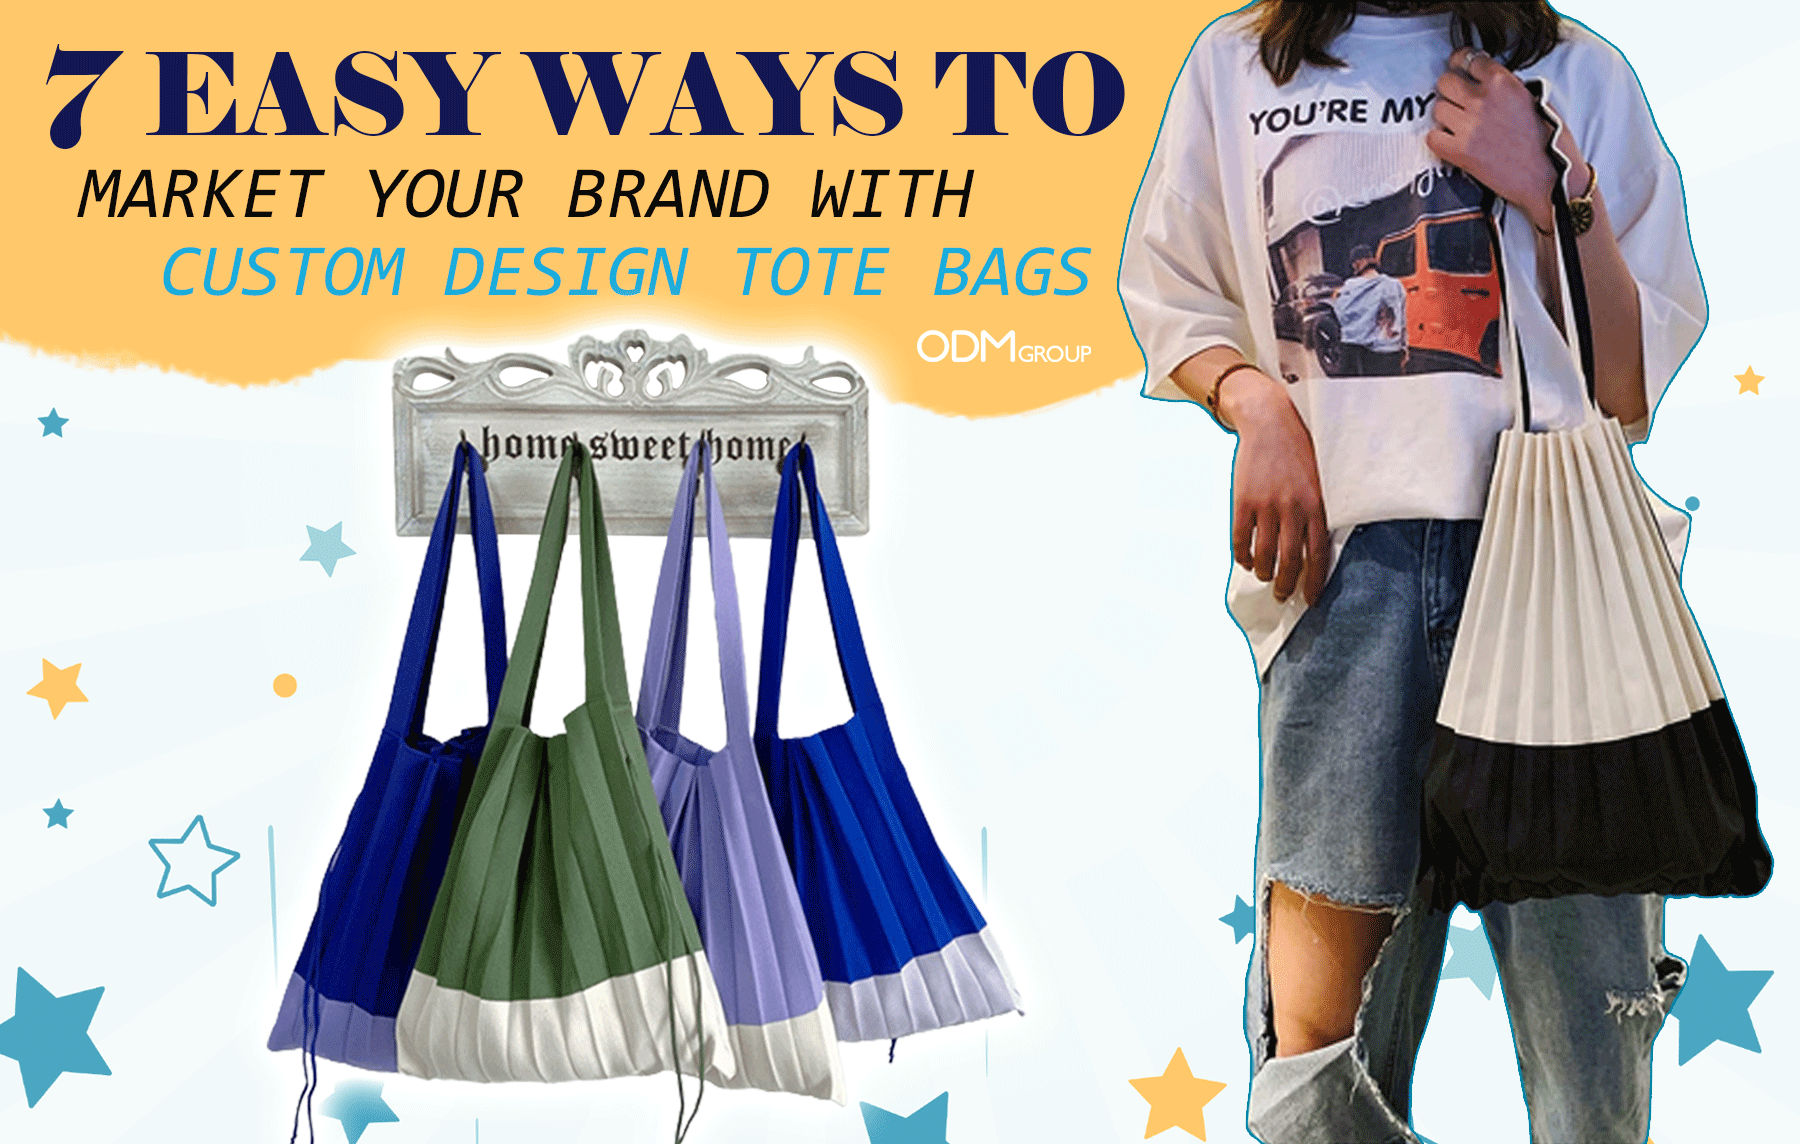 How to Use Promotional Tote Bags to Promote Your Brand